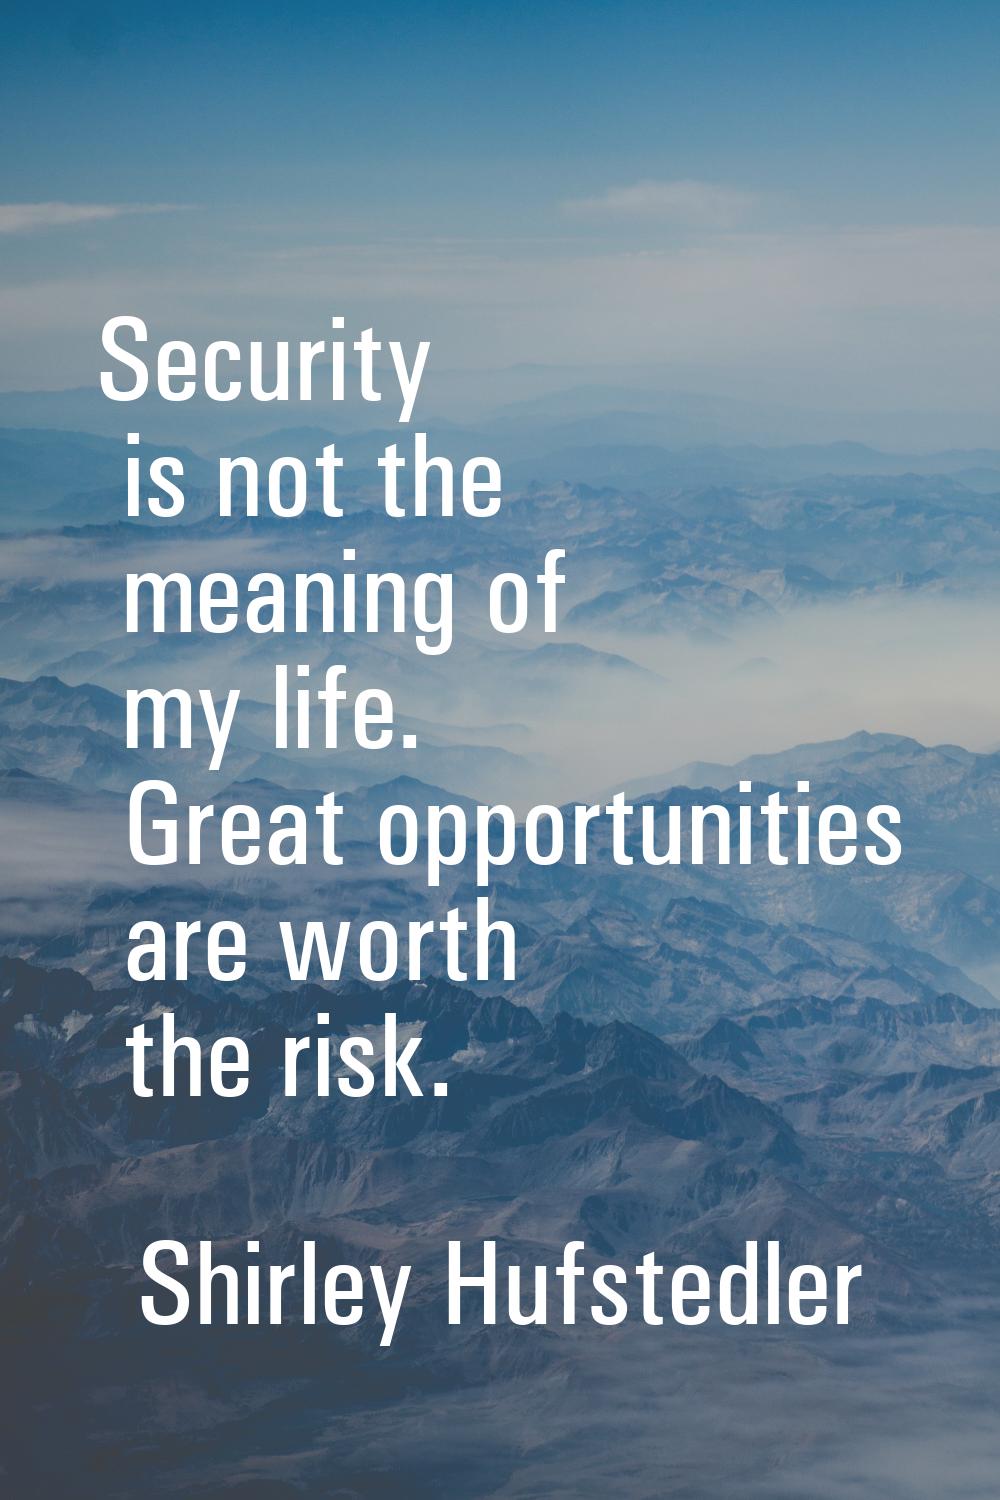 Security is not the meaning of my life. Great opportunities are worth the risk.